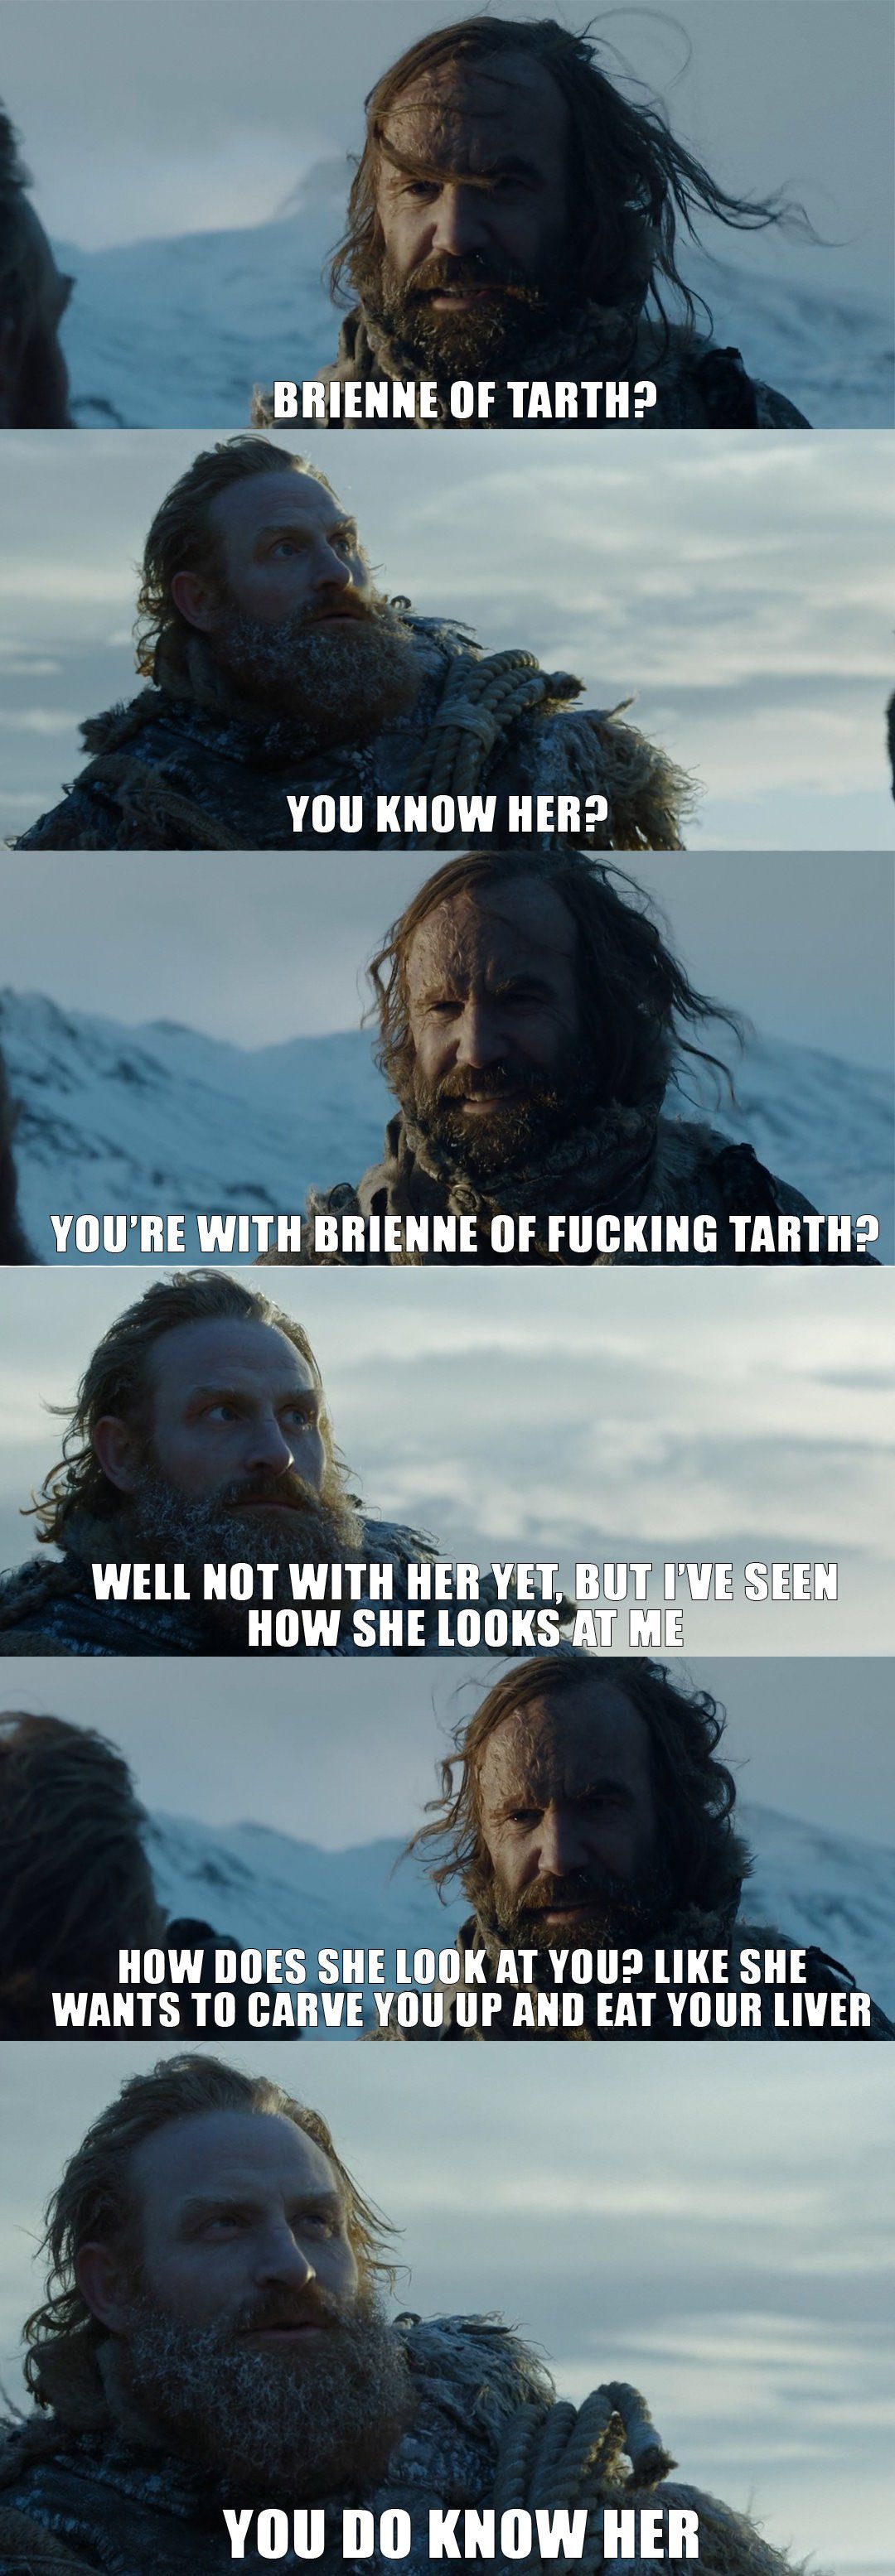 The Brienne of ***ing Tarth..